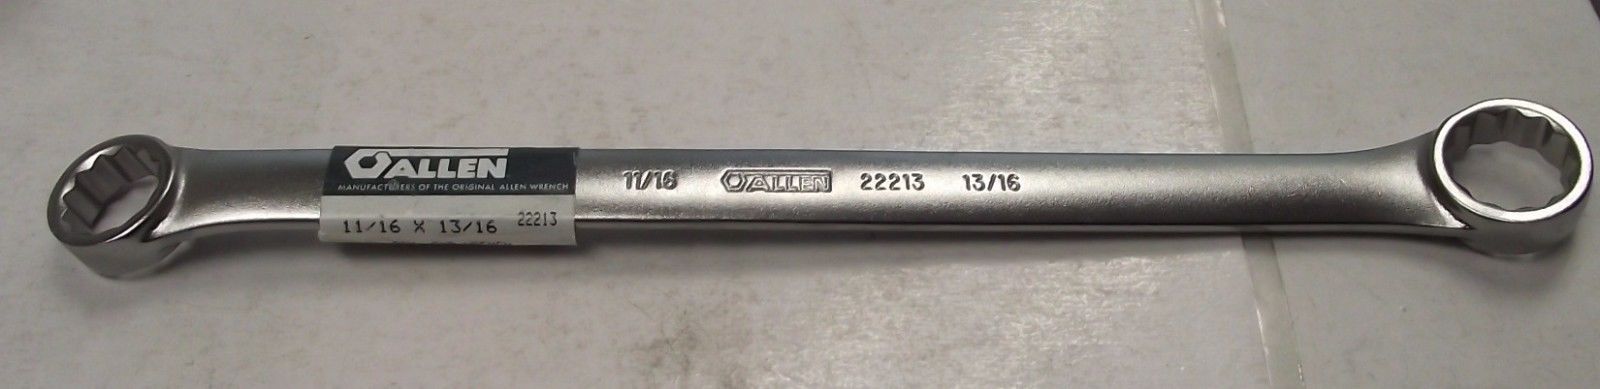 Allen 22213 11/16" x 13/16" 12 Point Offset Box End Wrenches USA